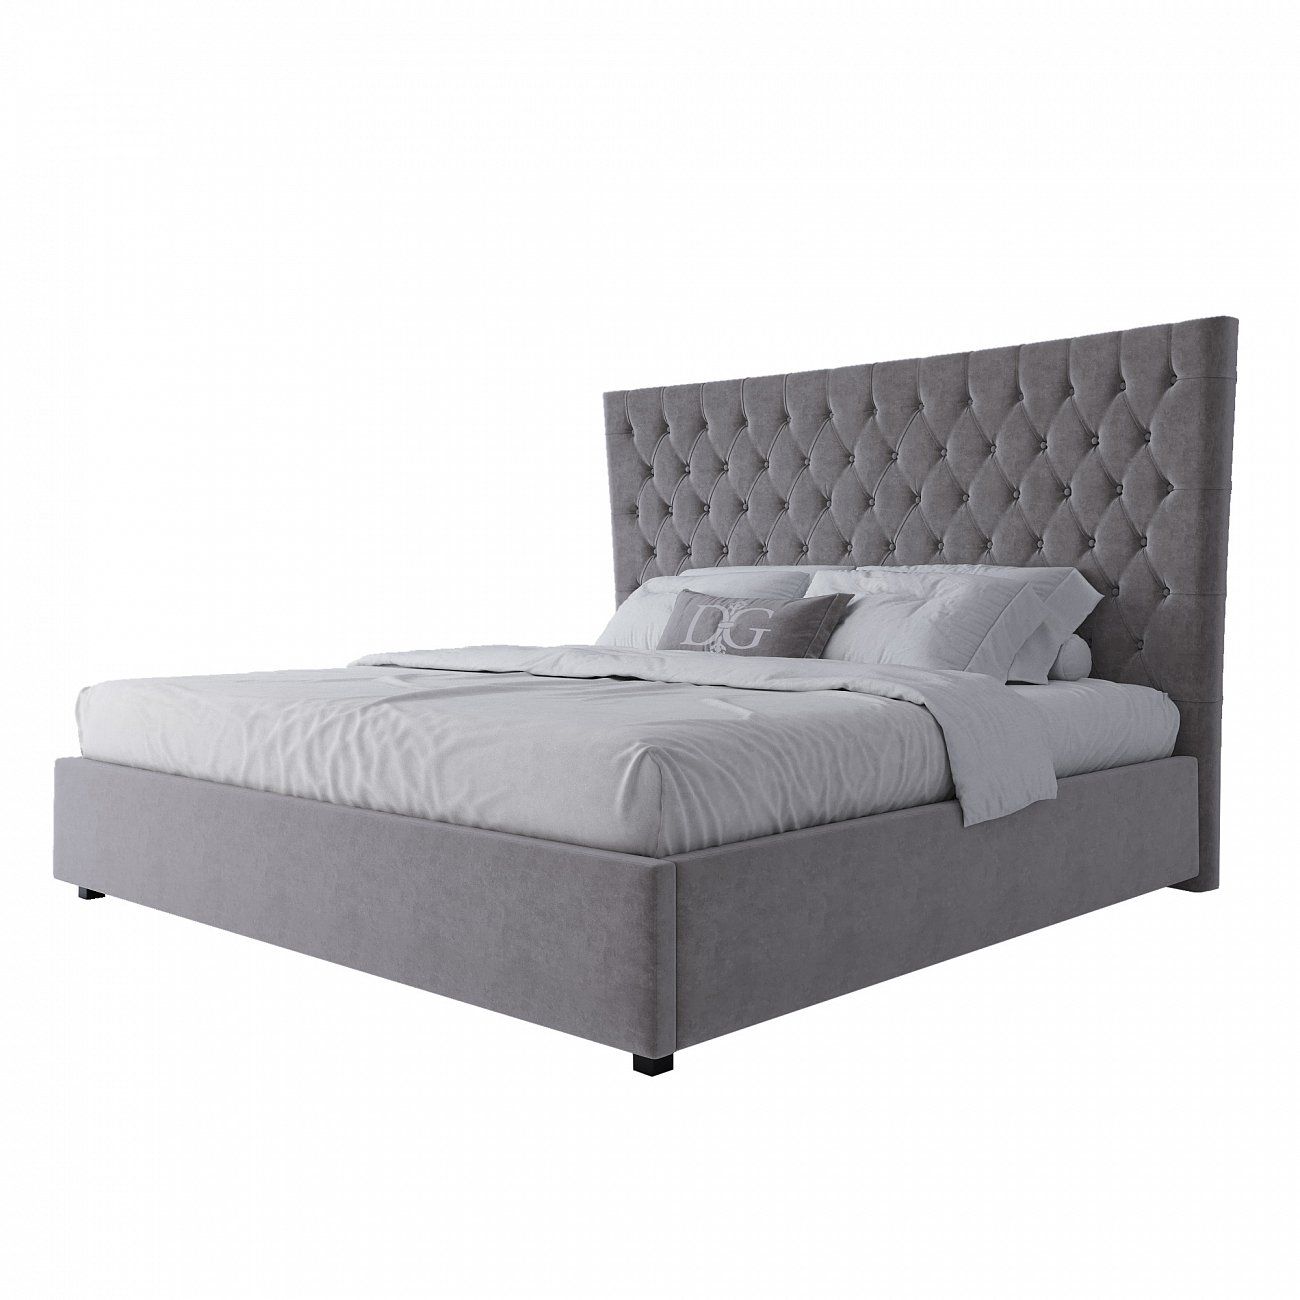 The bed is large 200x200 QuickSand gray-beige